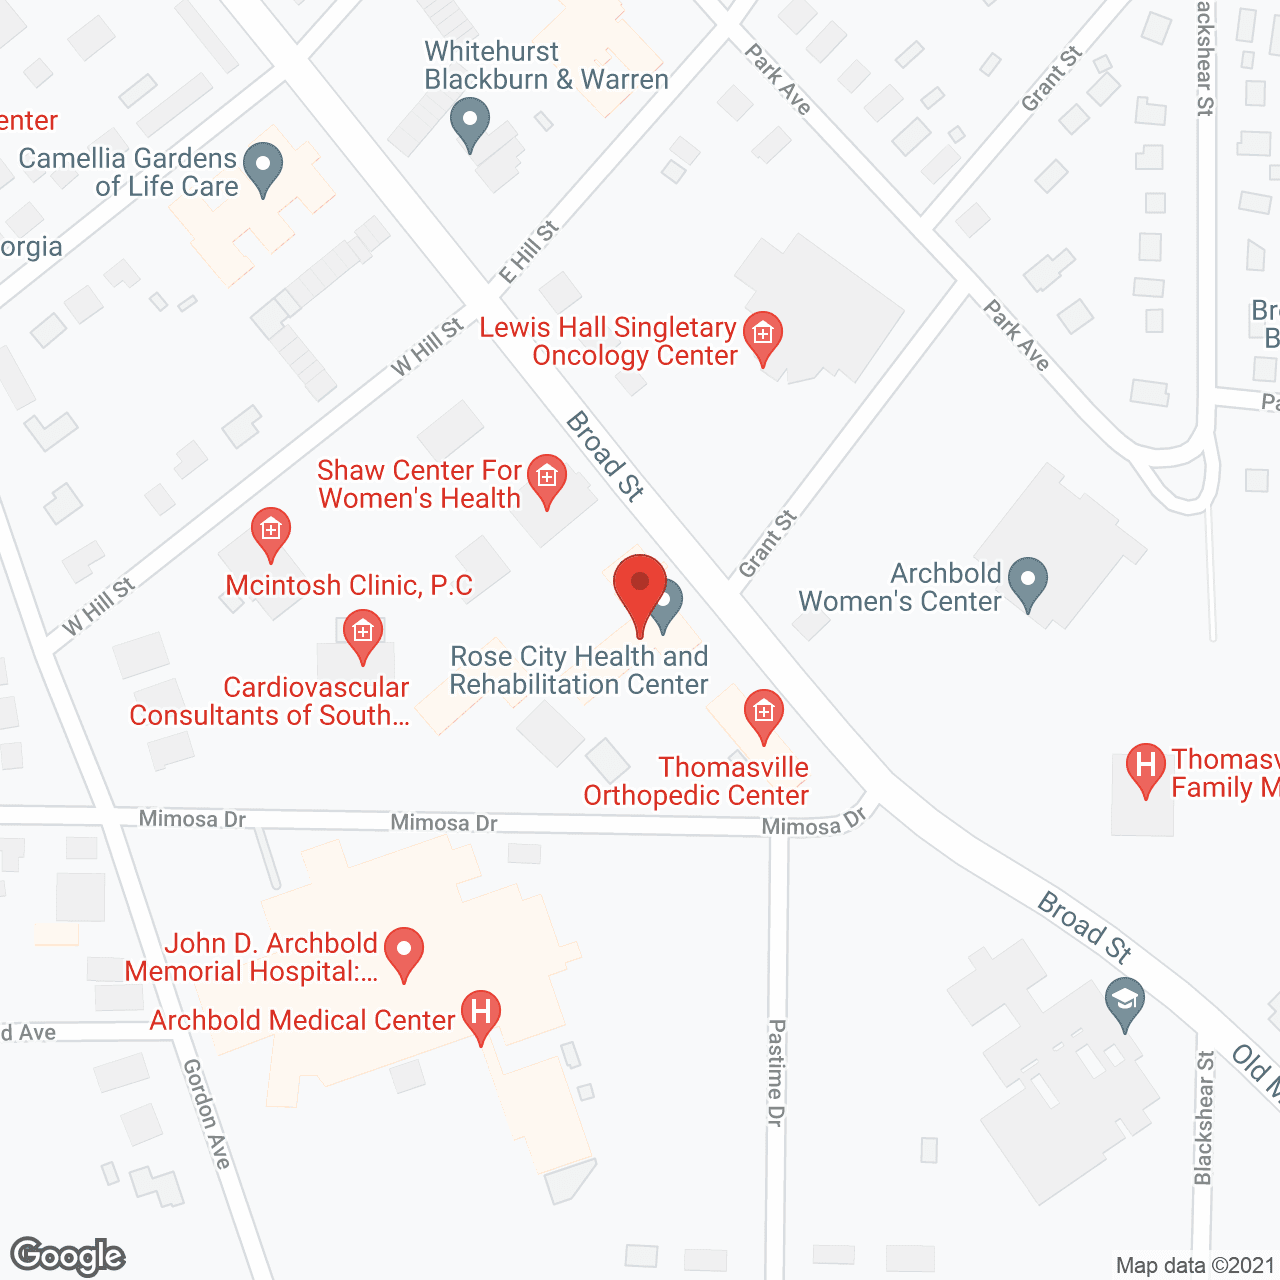 Hospitality Care Center in google map